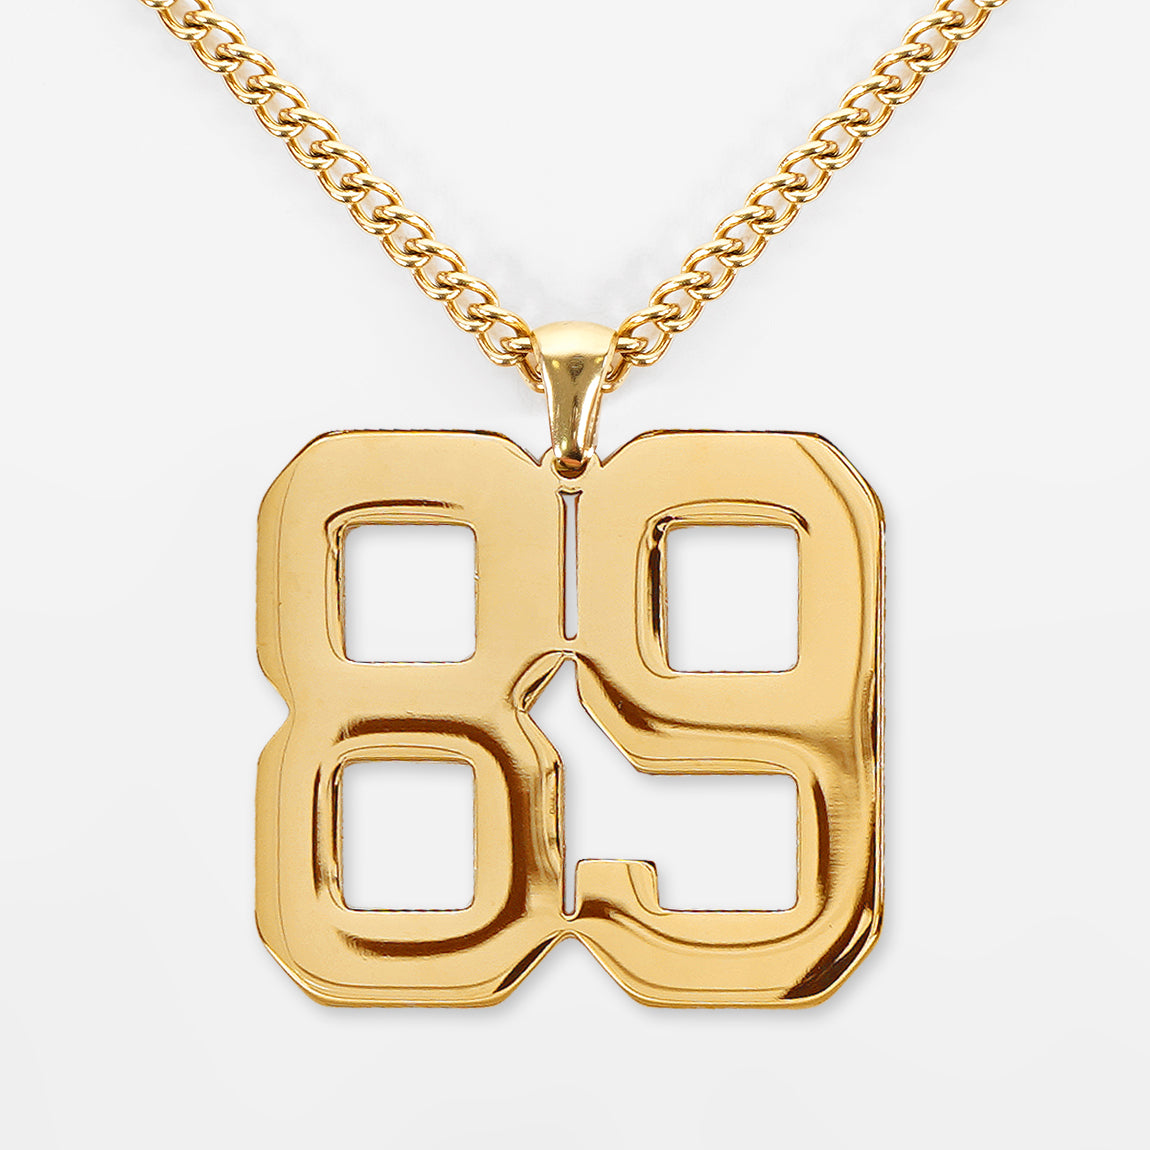 89 Number Pendant with Chain Necklace - Gold Plated Stainless Steel